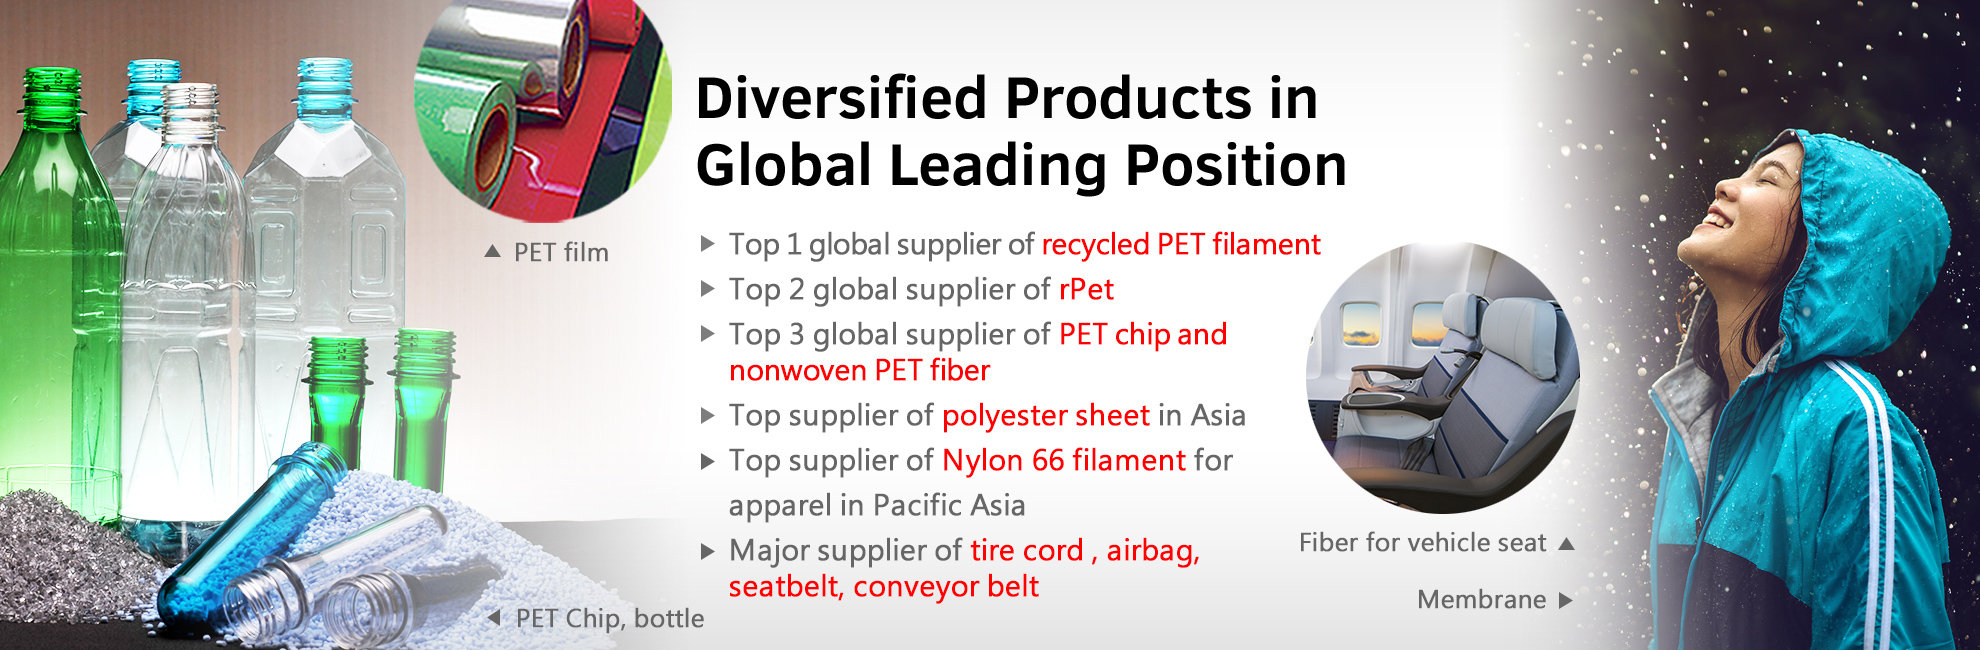 Diversified products in global leading position